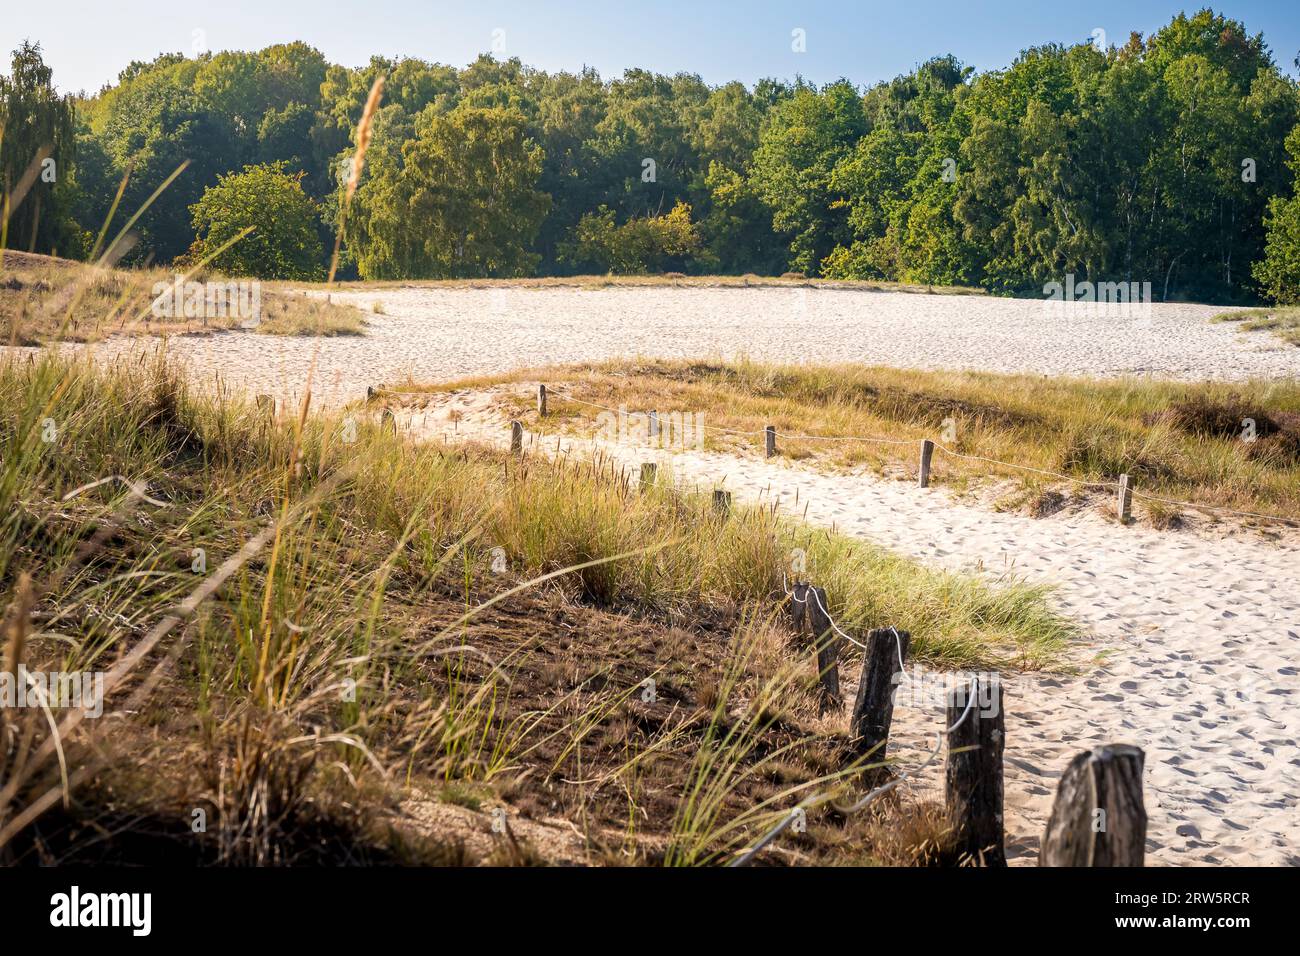 Walk through the picturesque sand dunes in Hamburg called Boberger Dünen, where a sandy path winds through sunlit dunes, surrounded by dune grass and Stock Photo